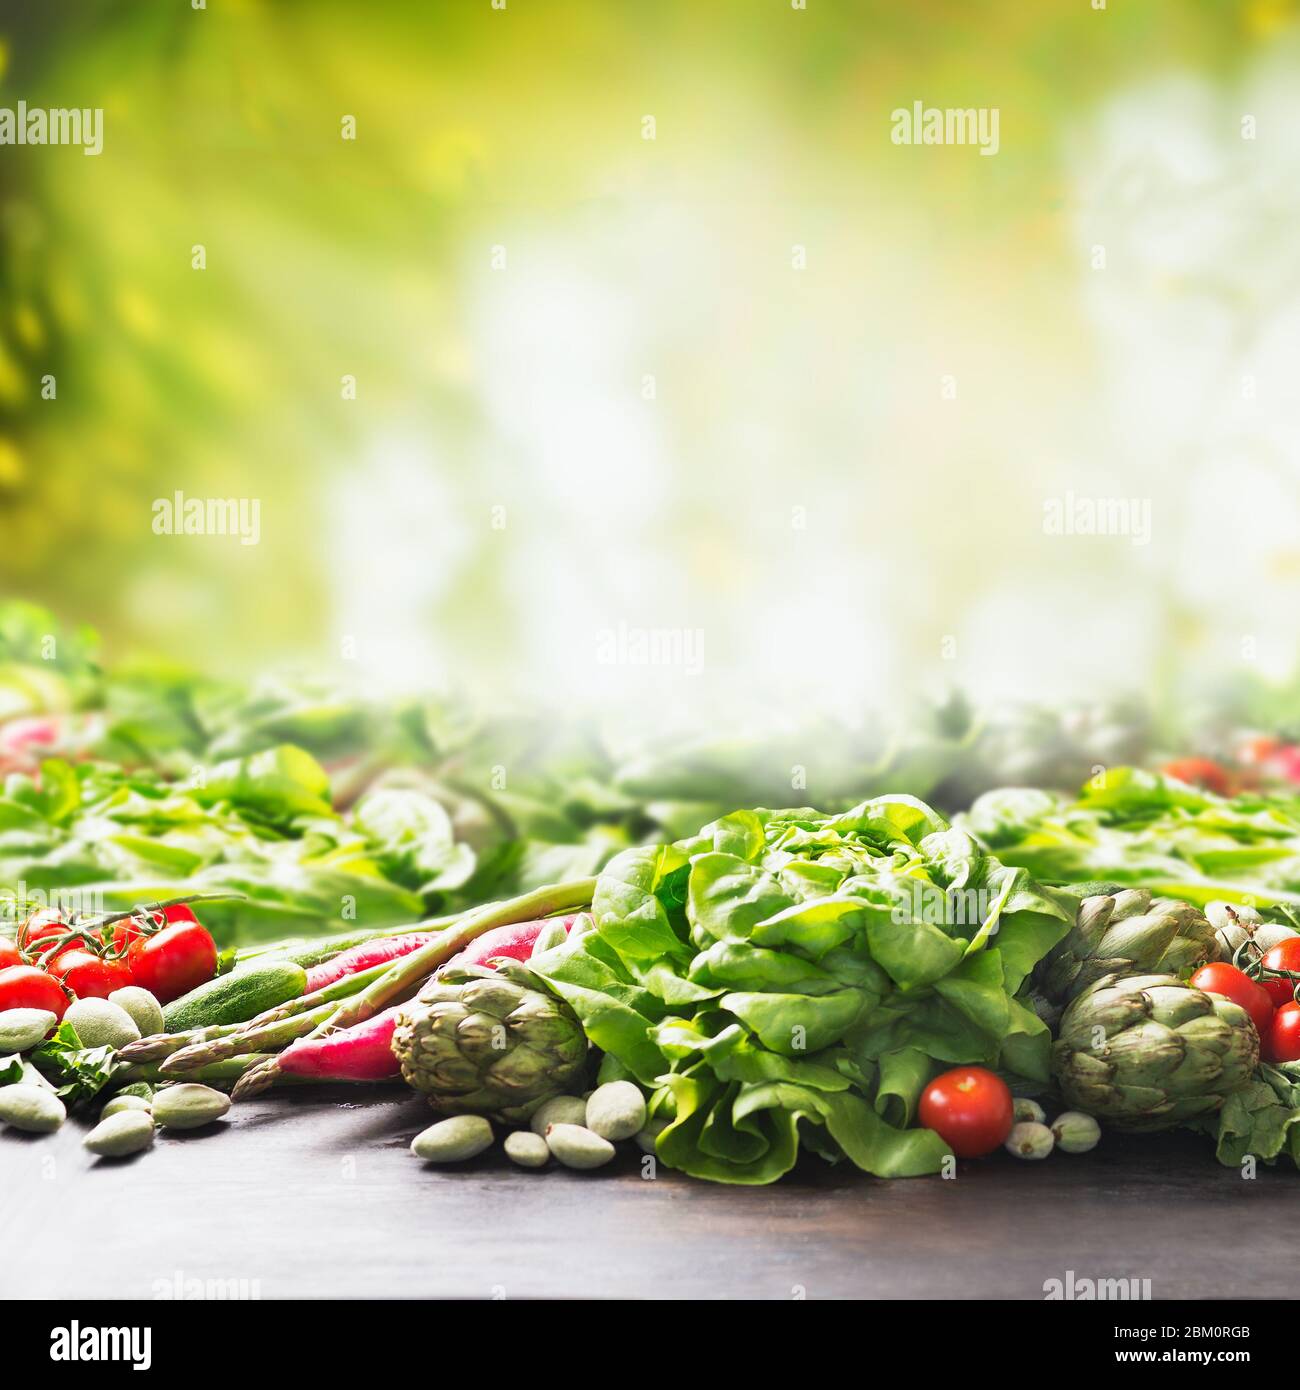 Organic farm vegetables background at sunny summer garden green nature  background. Eco veggies . Healthy clean food concept. Tomato, lettuce, root  v Stock Photo - Alamy